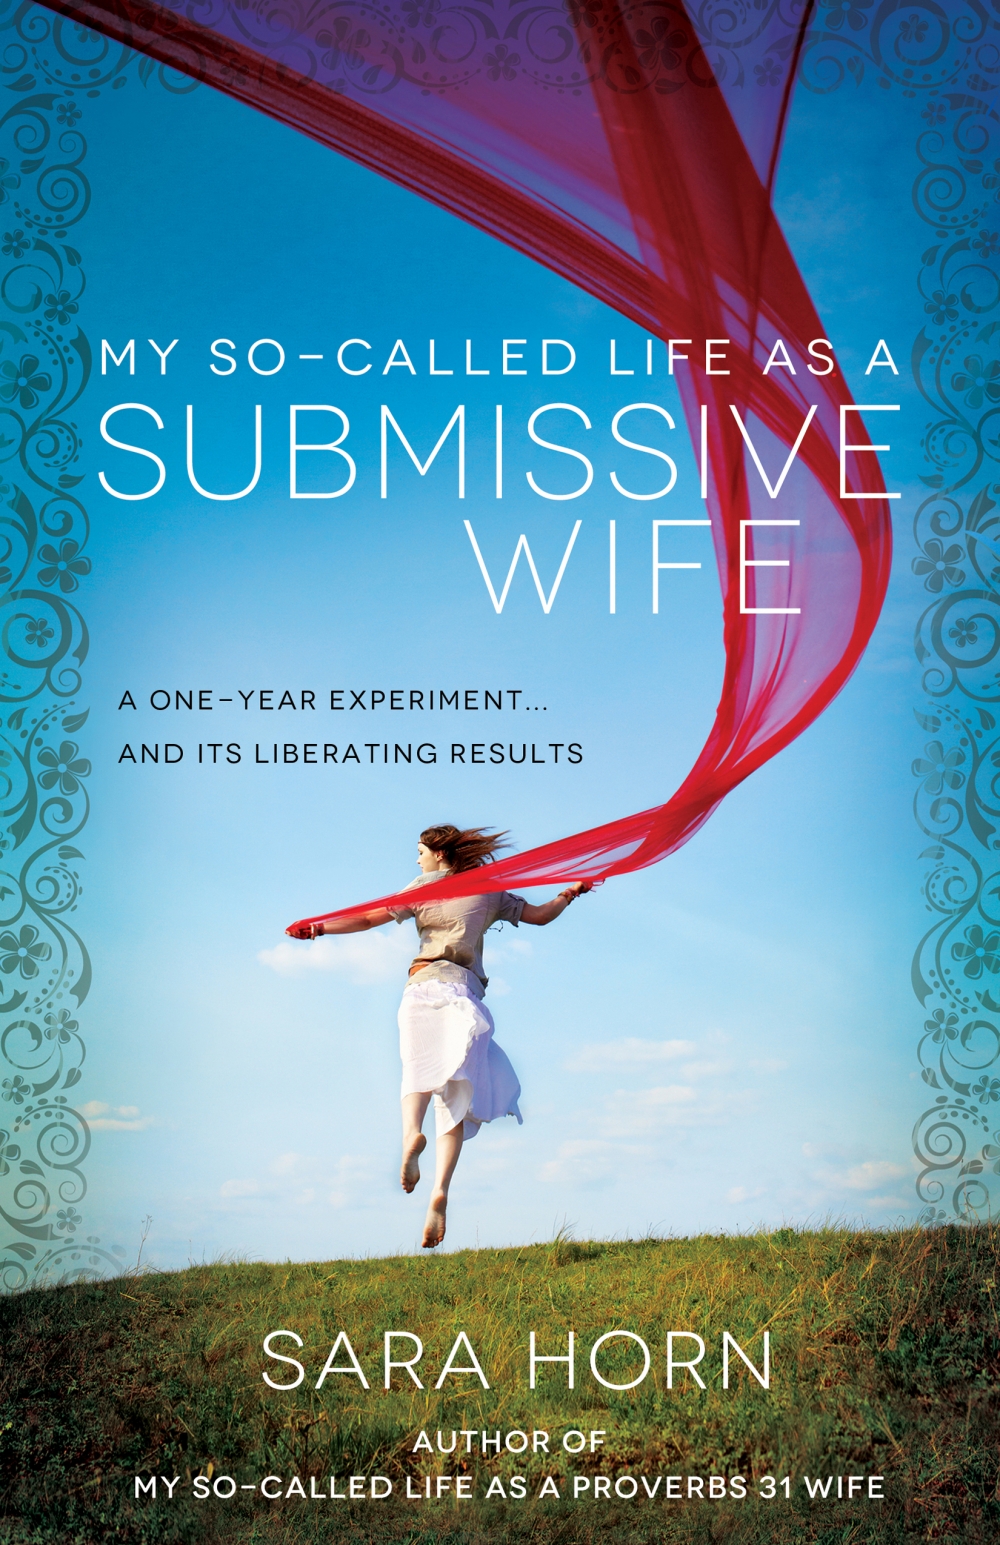 My life my wife. So Called Life. A New Life in submission. A New Life of submission.